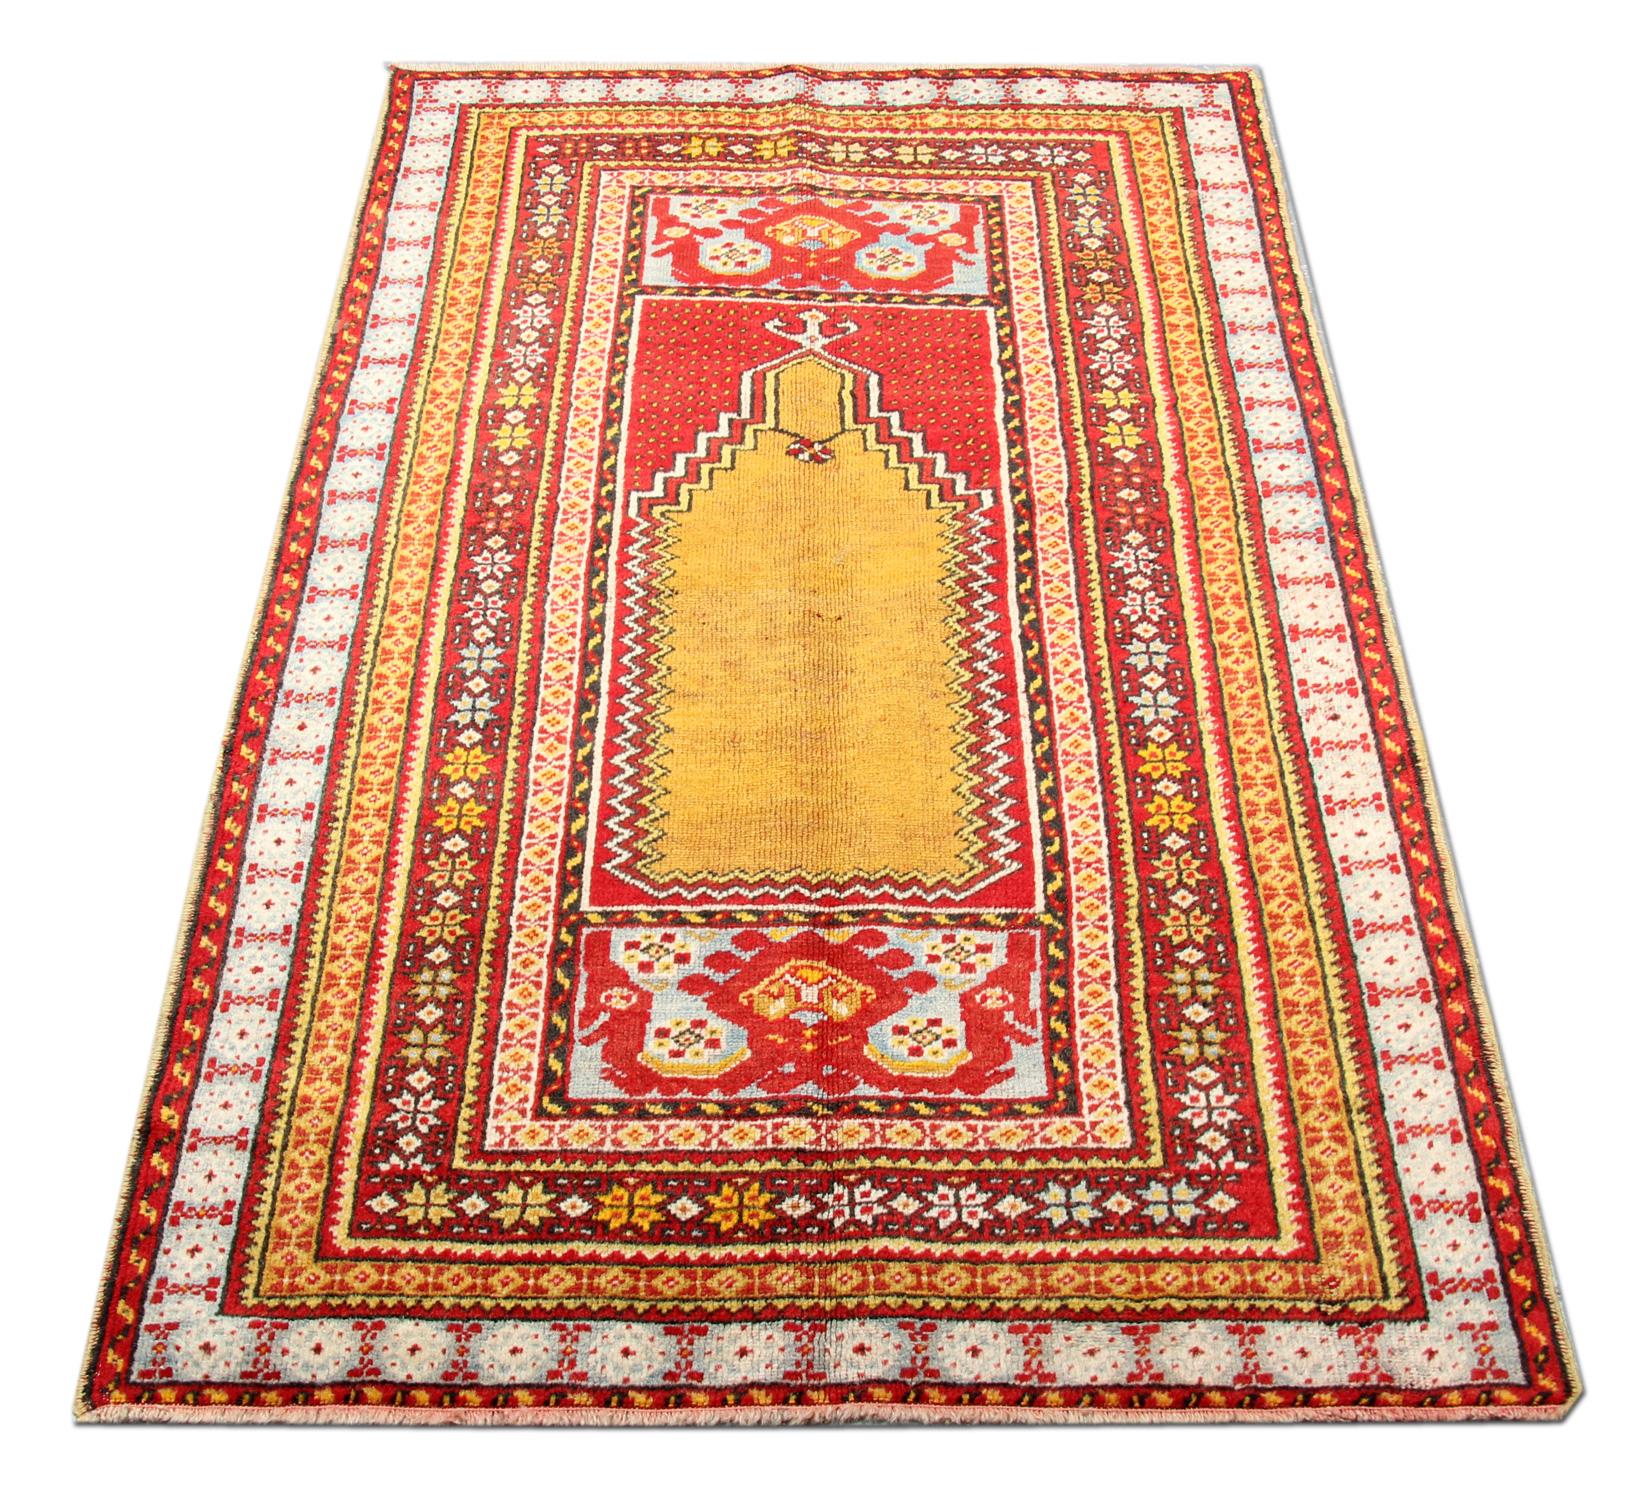 This handmade carpet soft colour vintage rug Milas carpet rests beautifully upon a field of shiny yellow rug, red, and blue colours. A fairly broad border of red and blue gently surrounds the centre field. Natural elements of stems, vines and